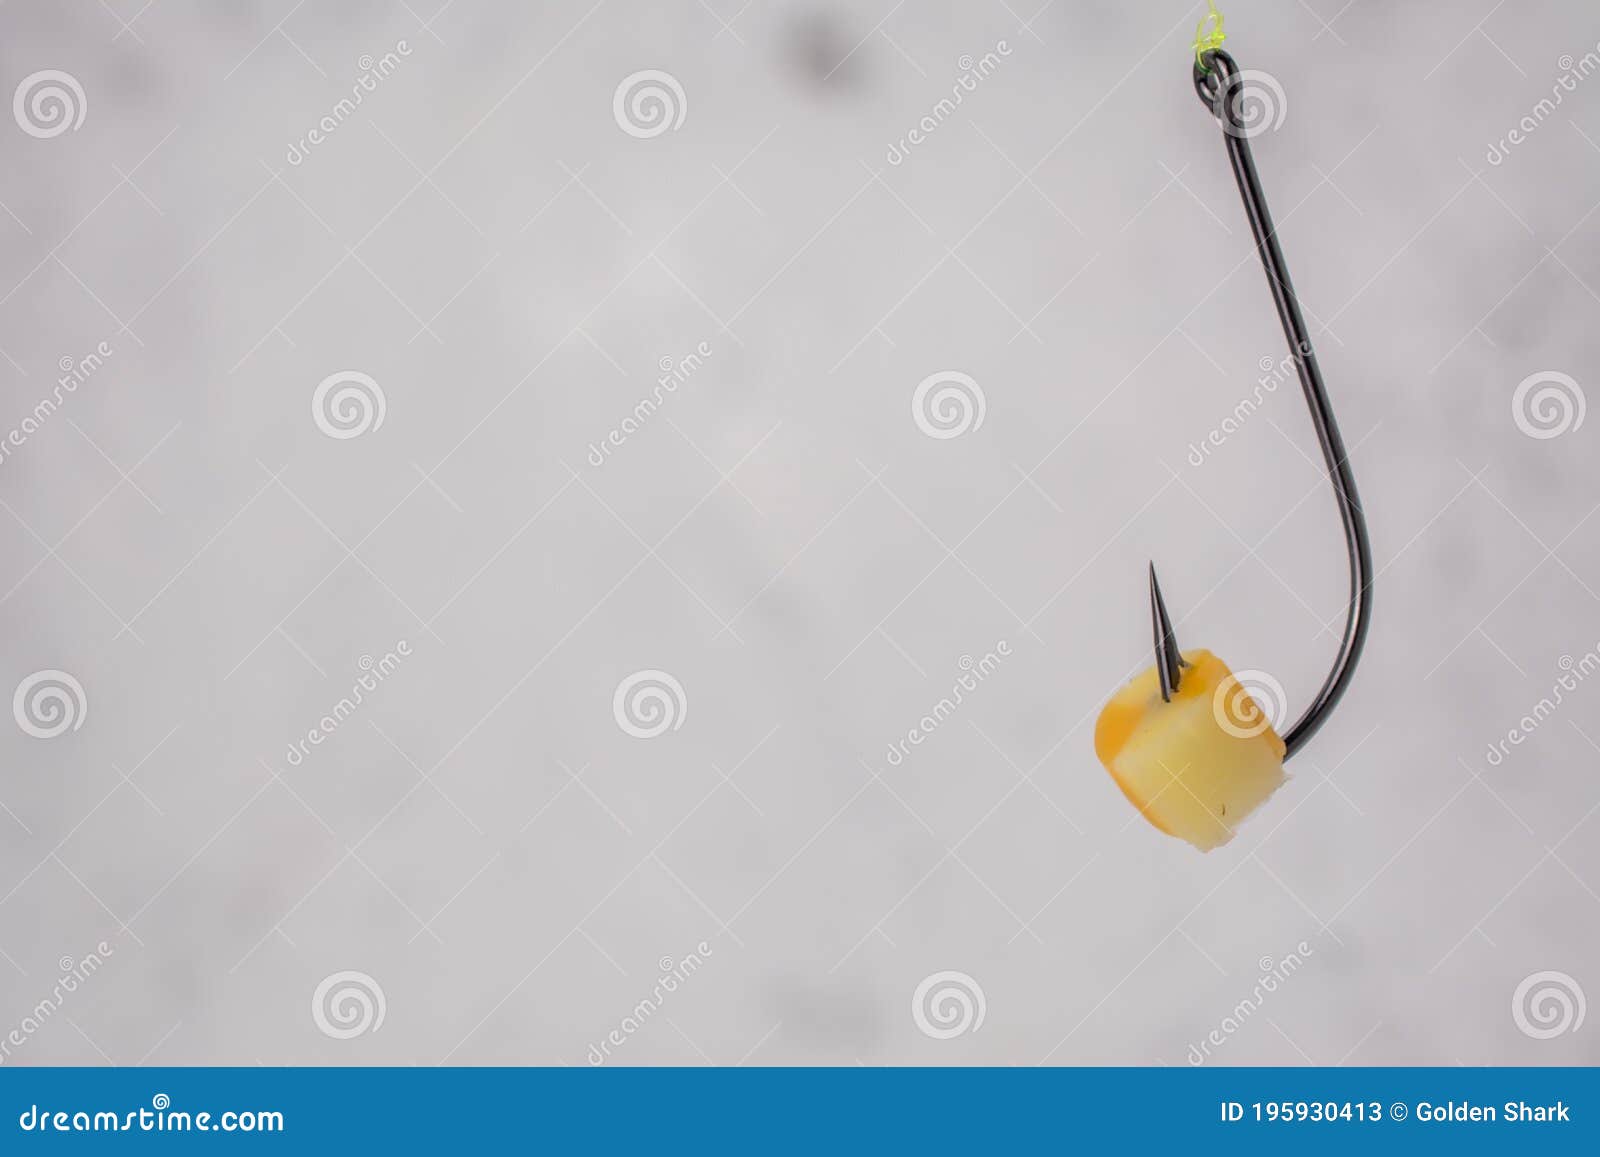 Steel Classic Fishing Hook with Cheese Stock Image - Image of